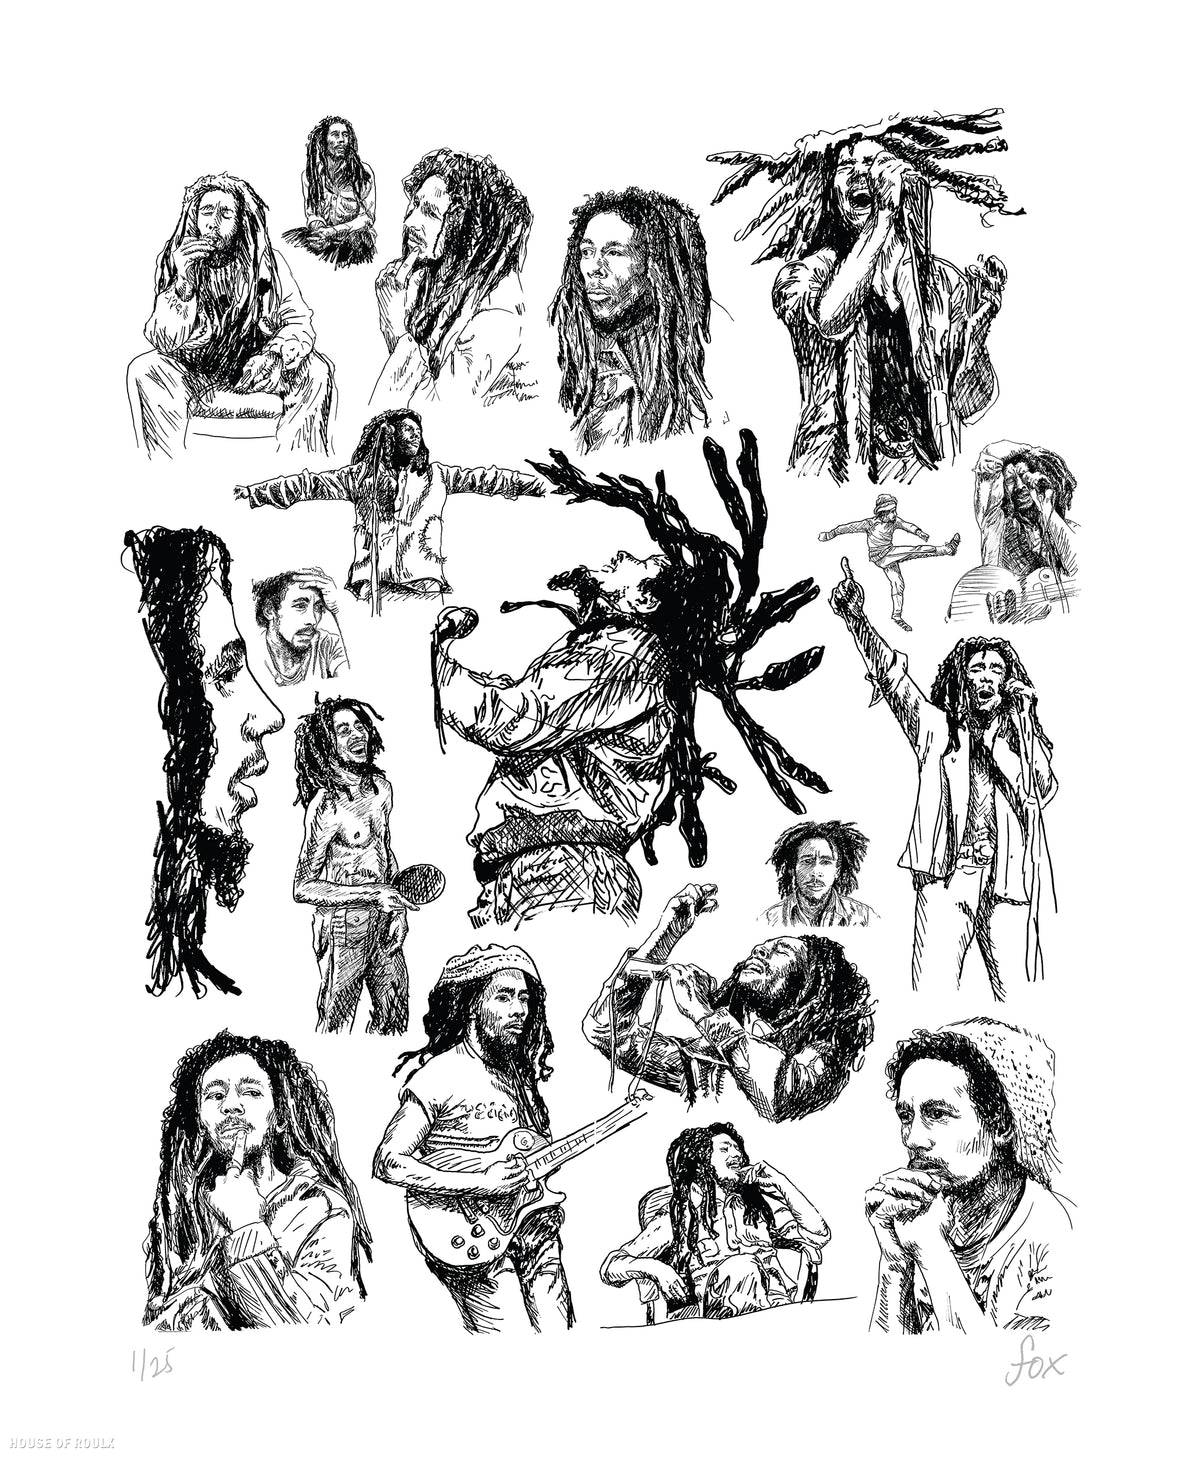 Mariah Fox &quot;Bob Marley Redemption 75 Drawings&quot; - Archival Print, Limited Edition of 25 - 14 x 17&quot;